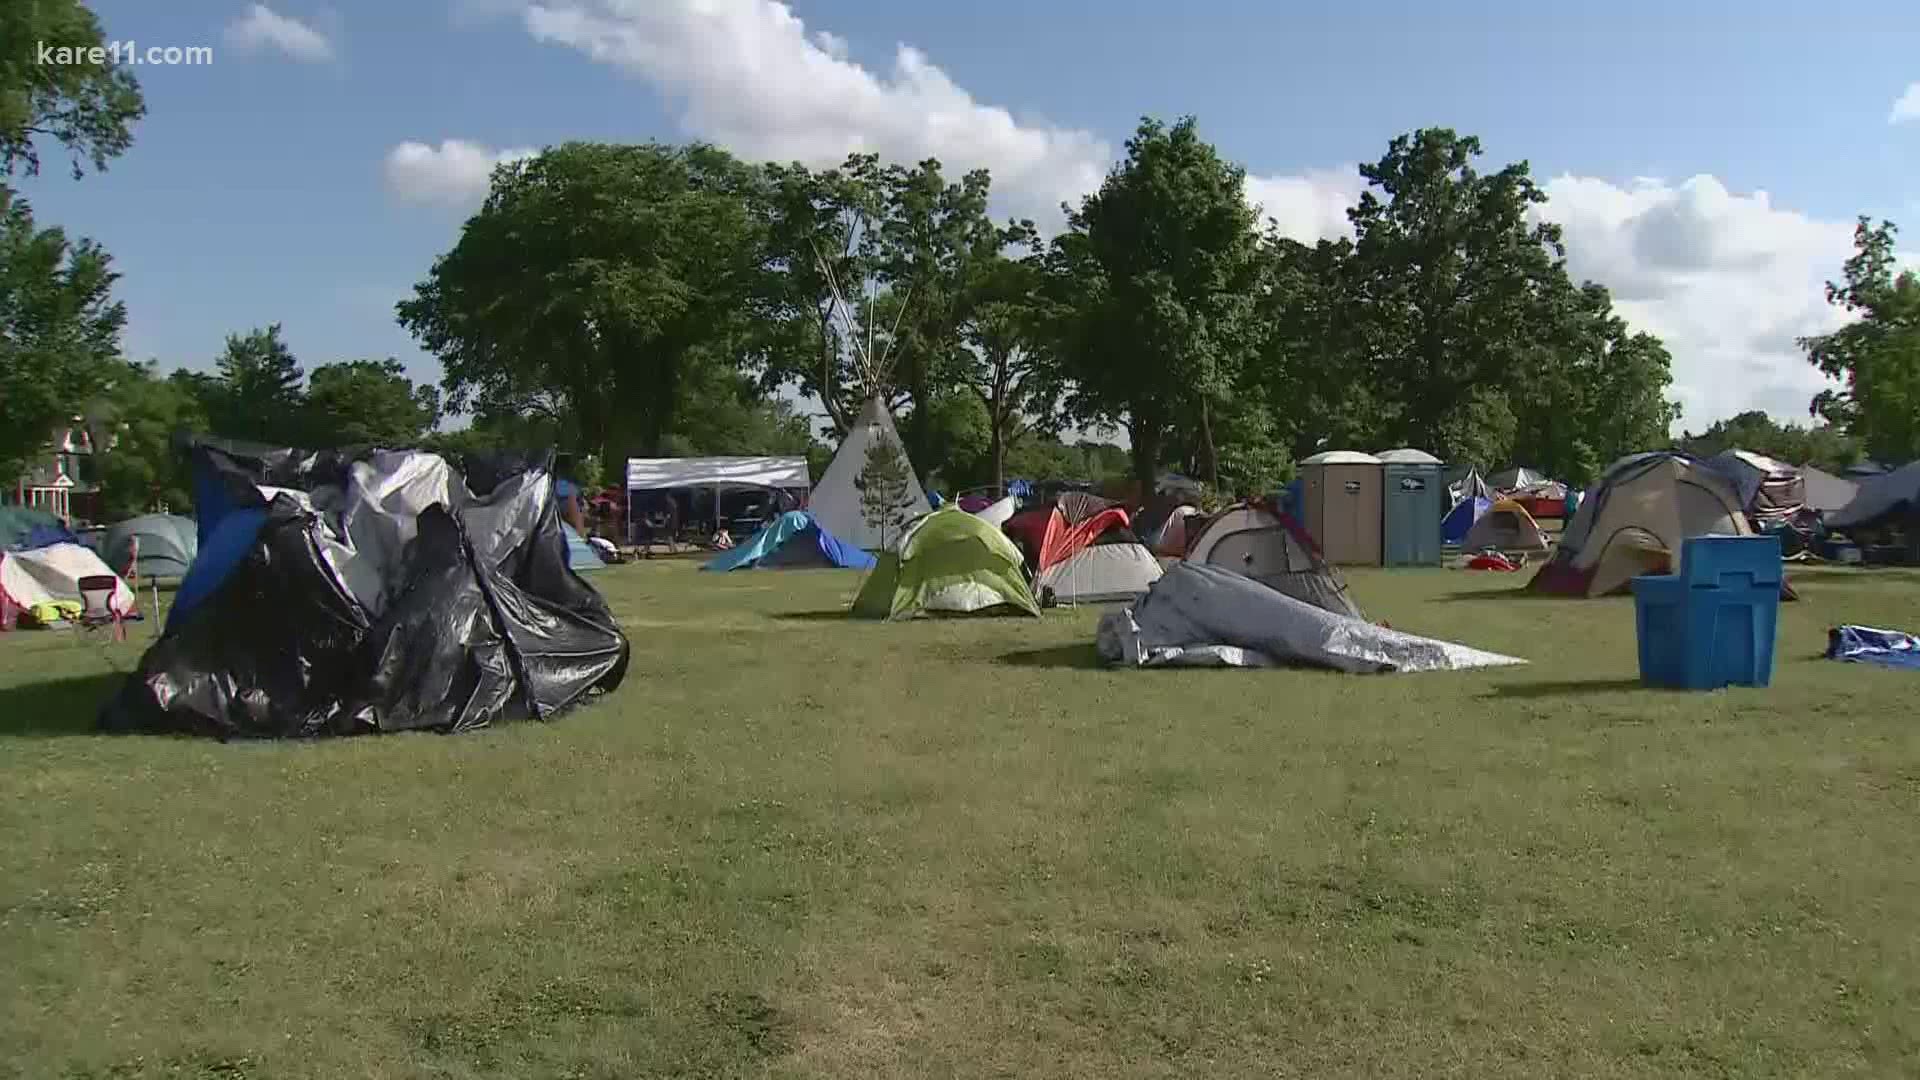 The new amendment would limit the number of parks with encampments to 10, and only allow 10 tents in each park.